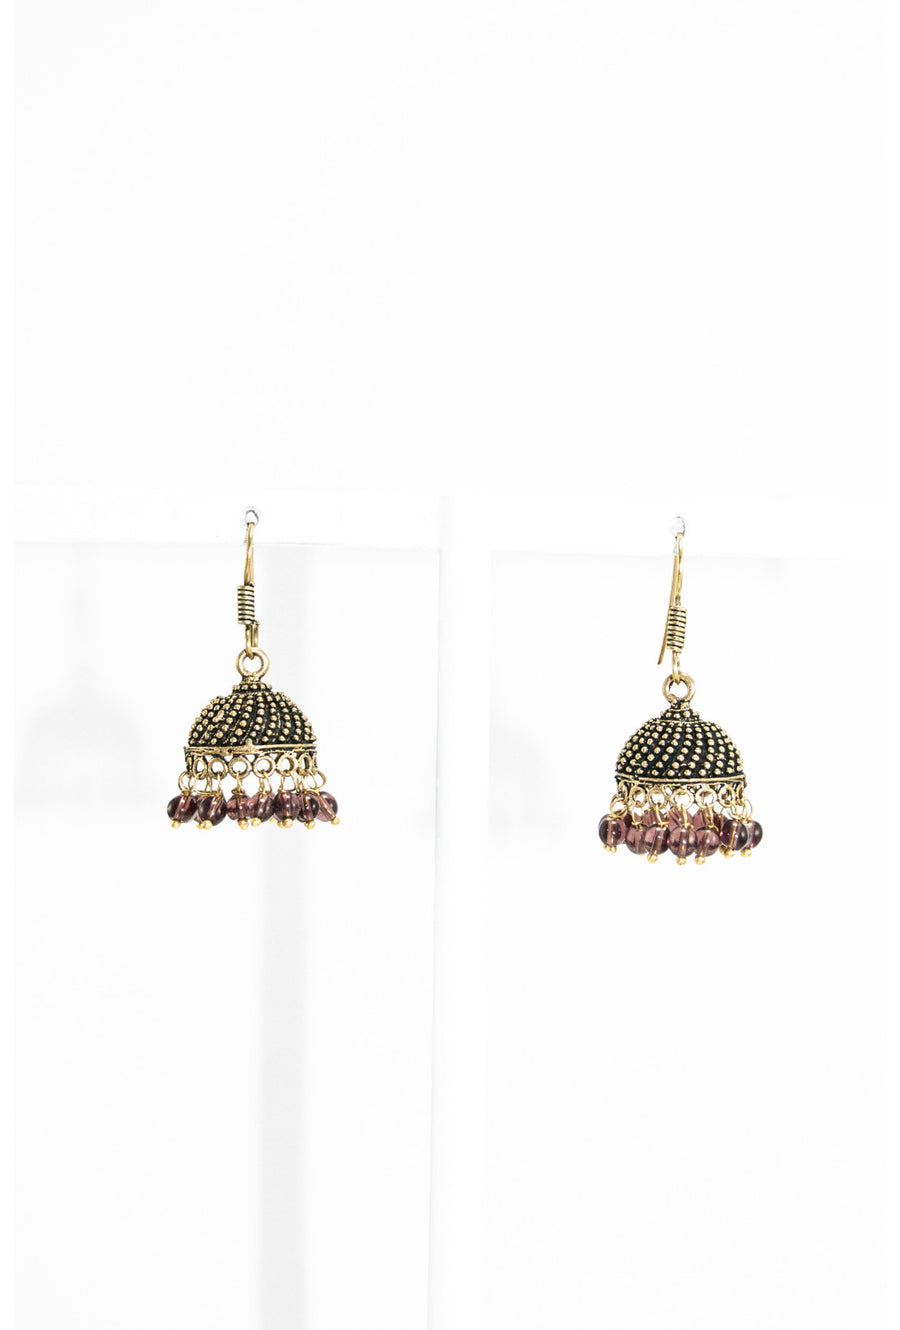 Gold domed earrings with brown beads - Desi Royale